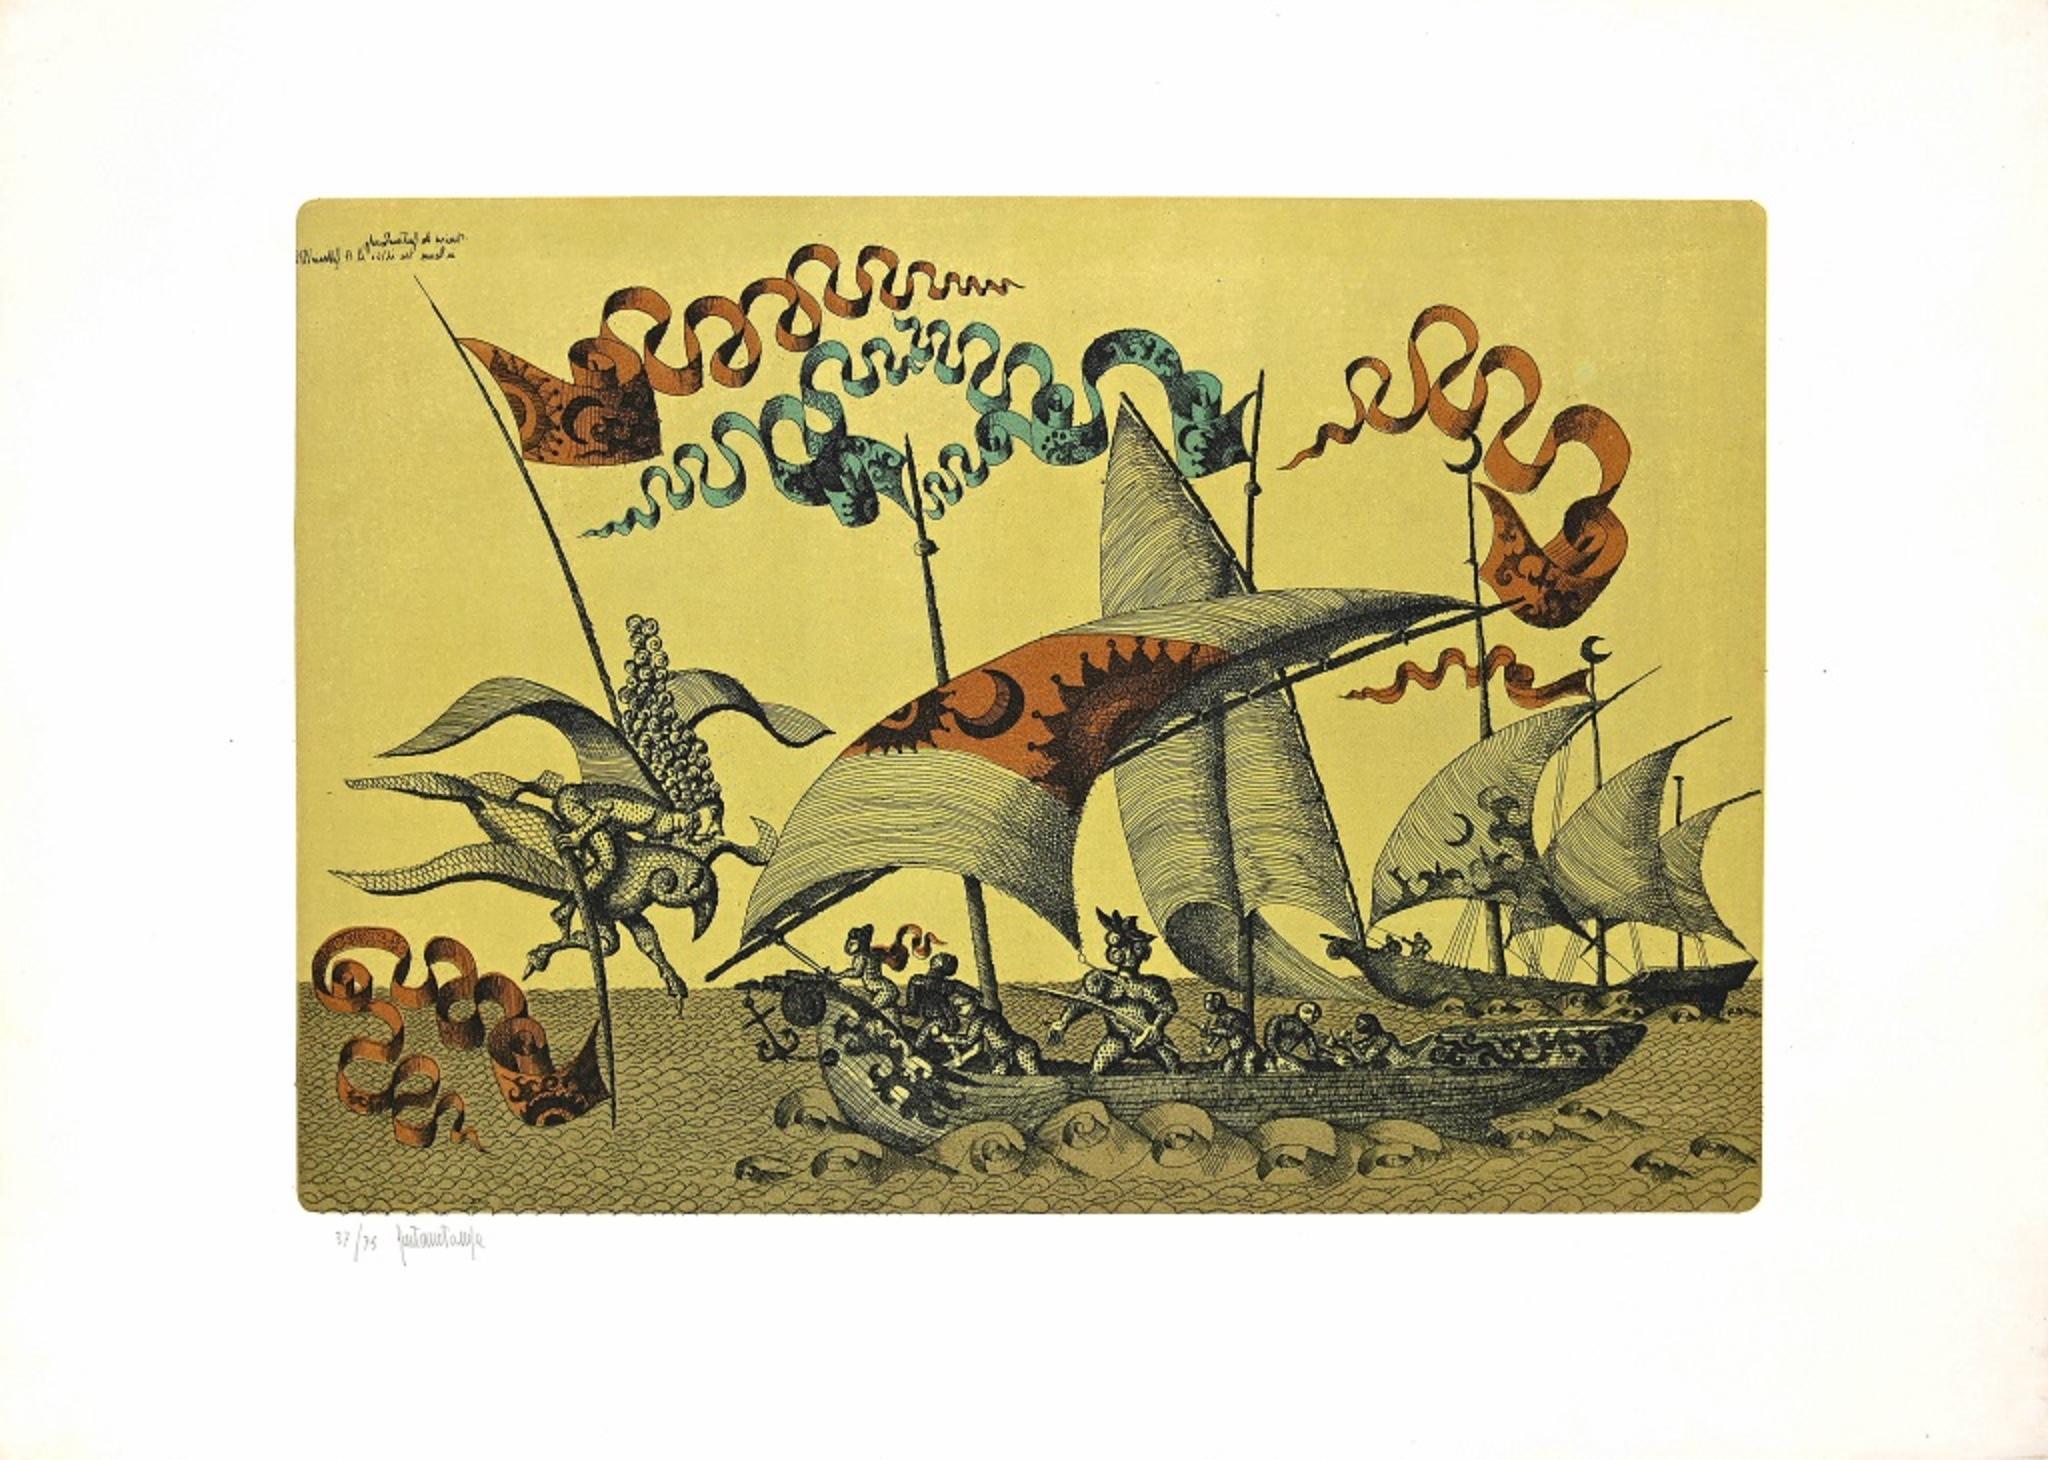 Boats is an original artwork realized by Gaetano Pompa (1933, Forenza- 1998) in the 1970s.

The artwork was completed by hand watercoloring.

The work is part of an edition of 75 numbered and signed.

Very good condition.

Gaetano Pompa was born in